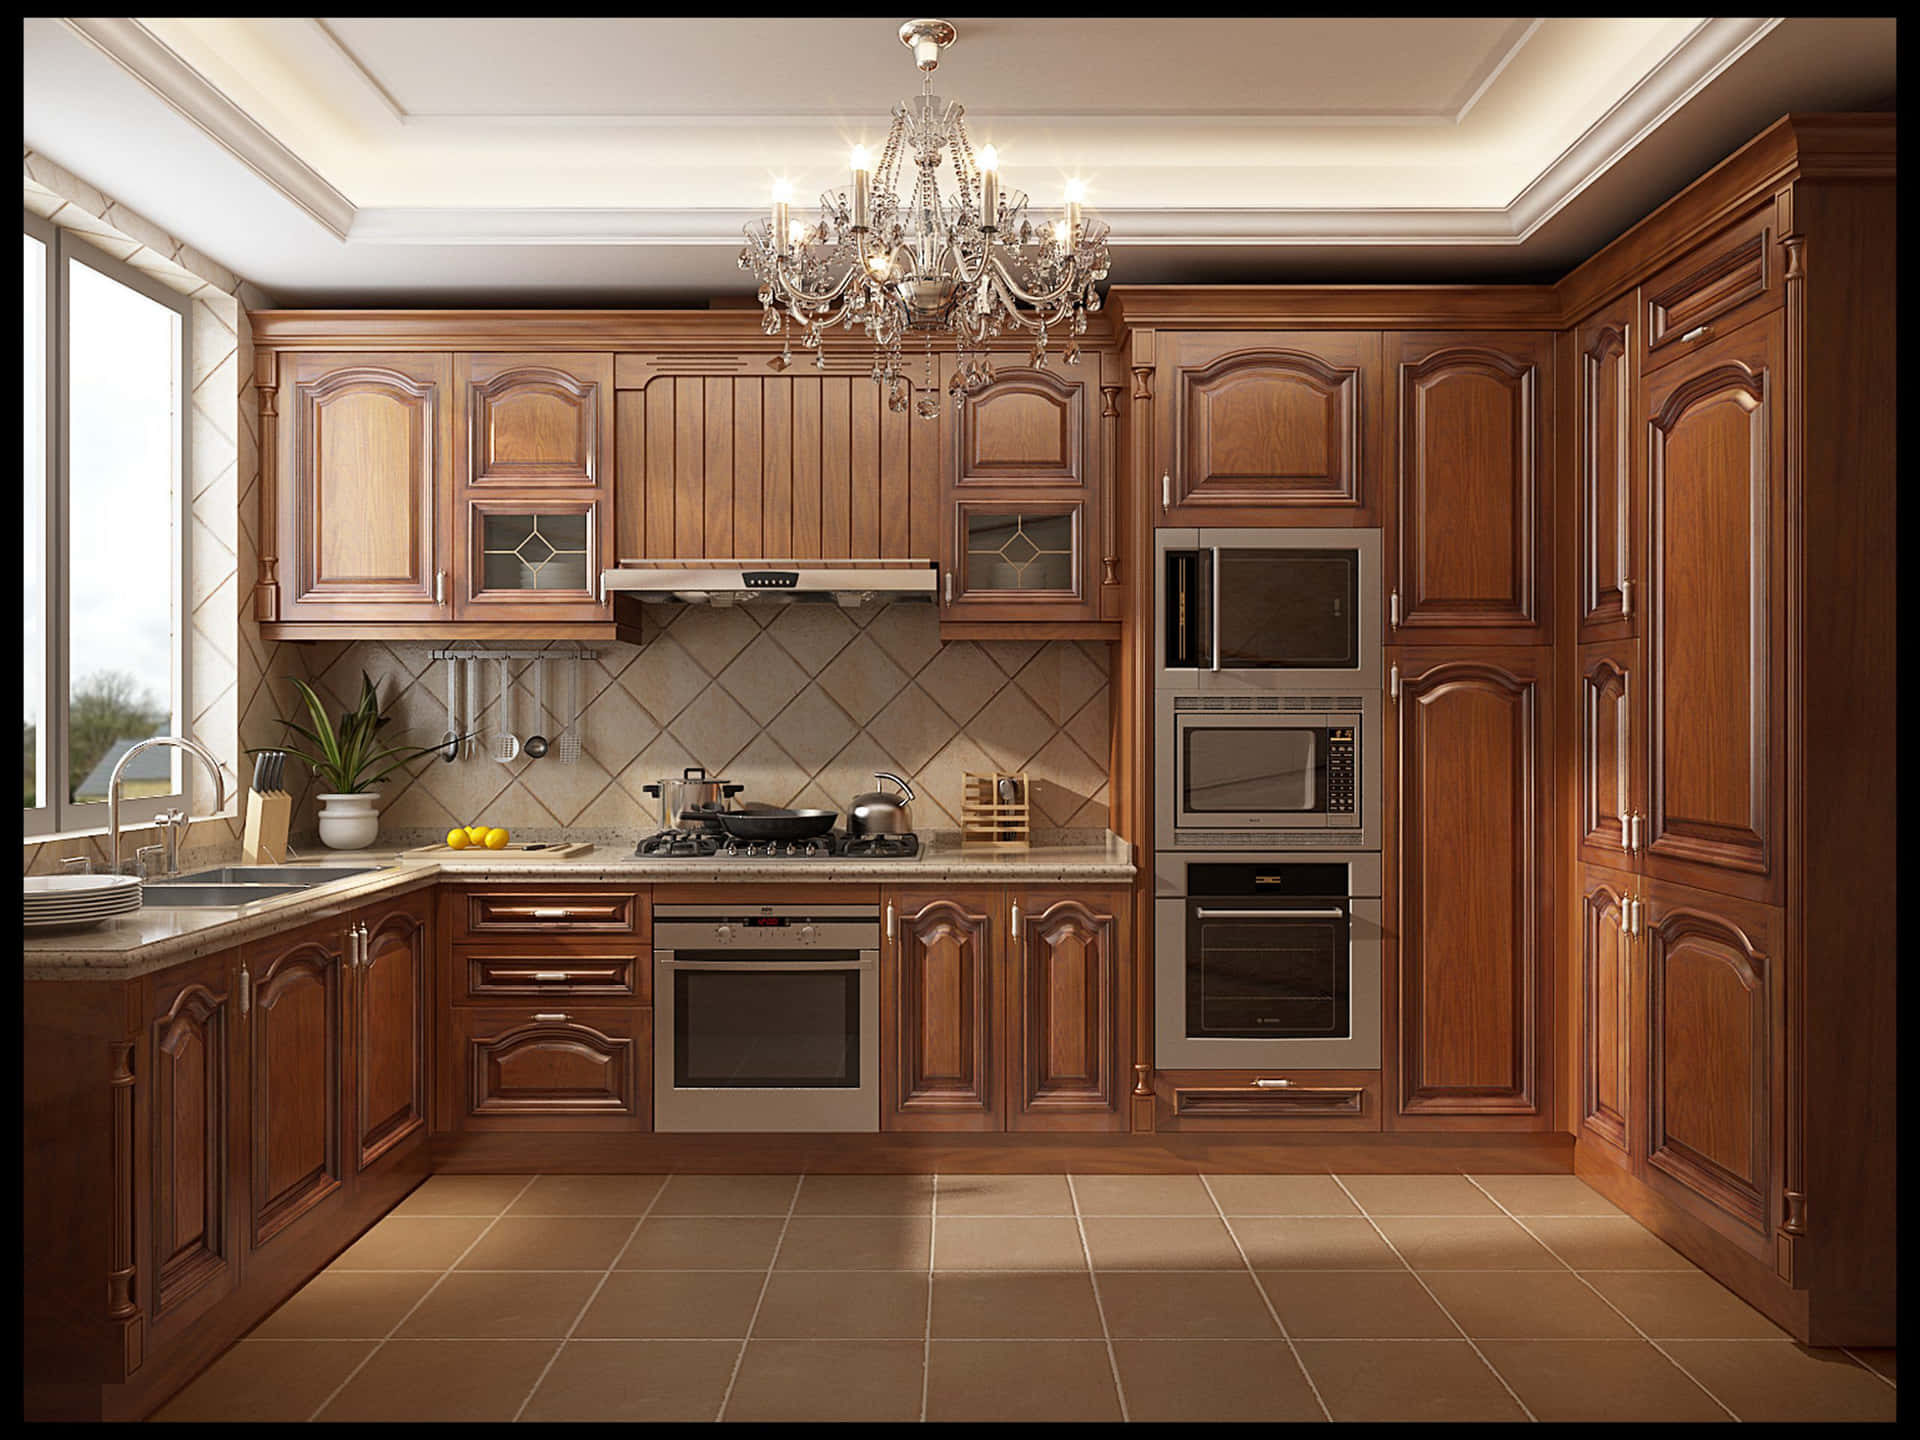 A Kitchen With Wooden Cabinets And A Chandelier